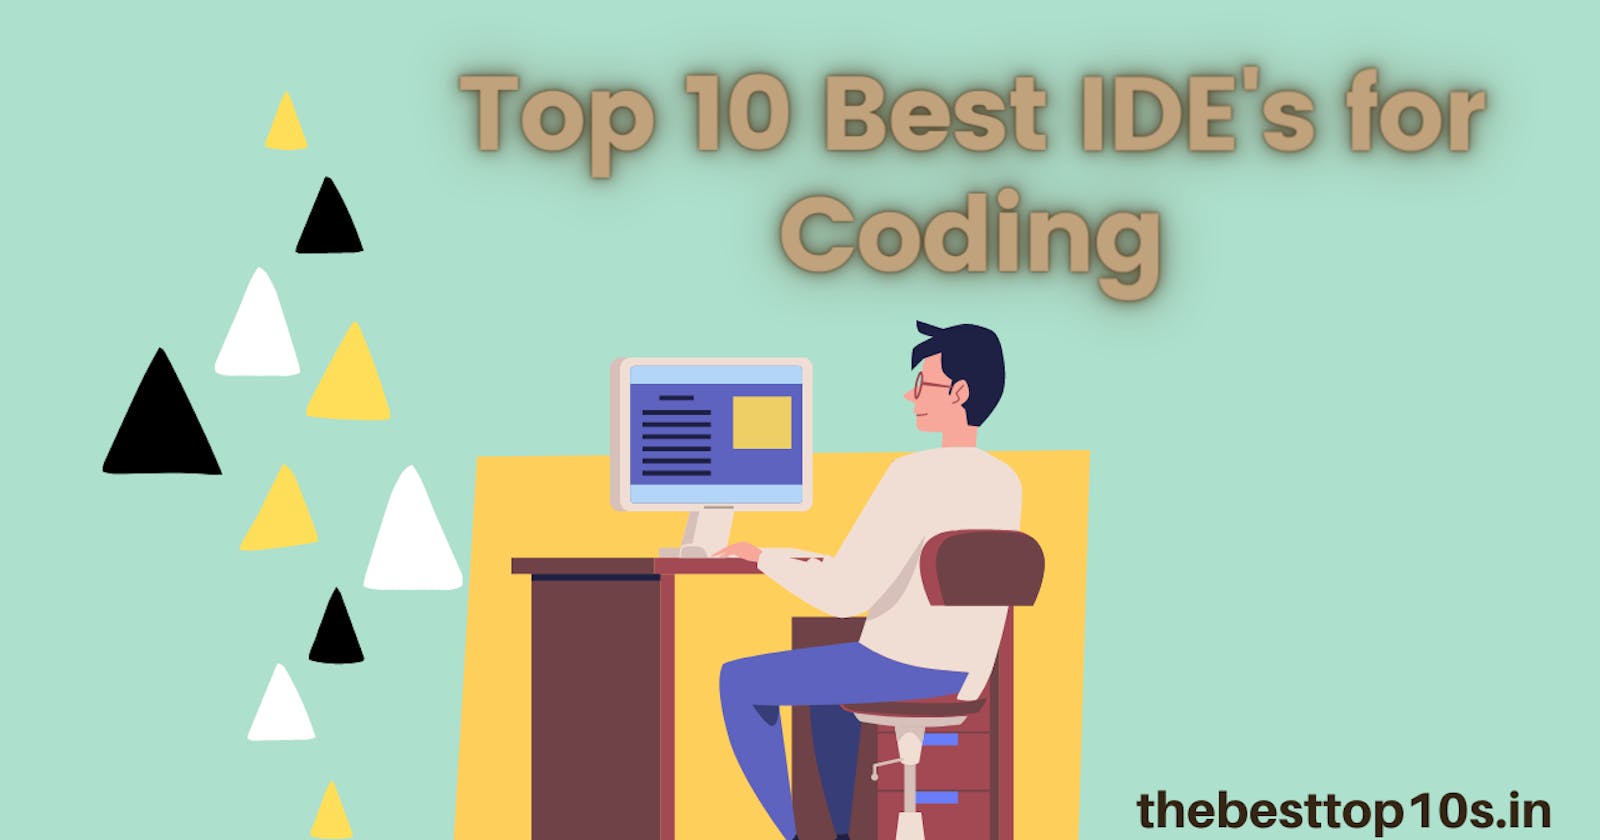 Top 10 Best IDE's for Coding